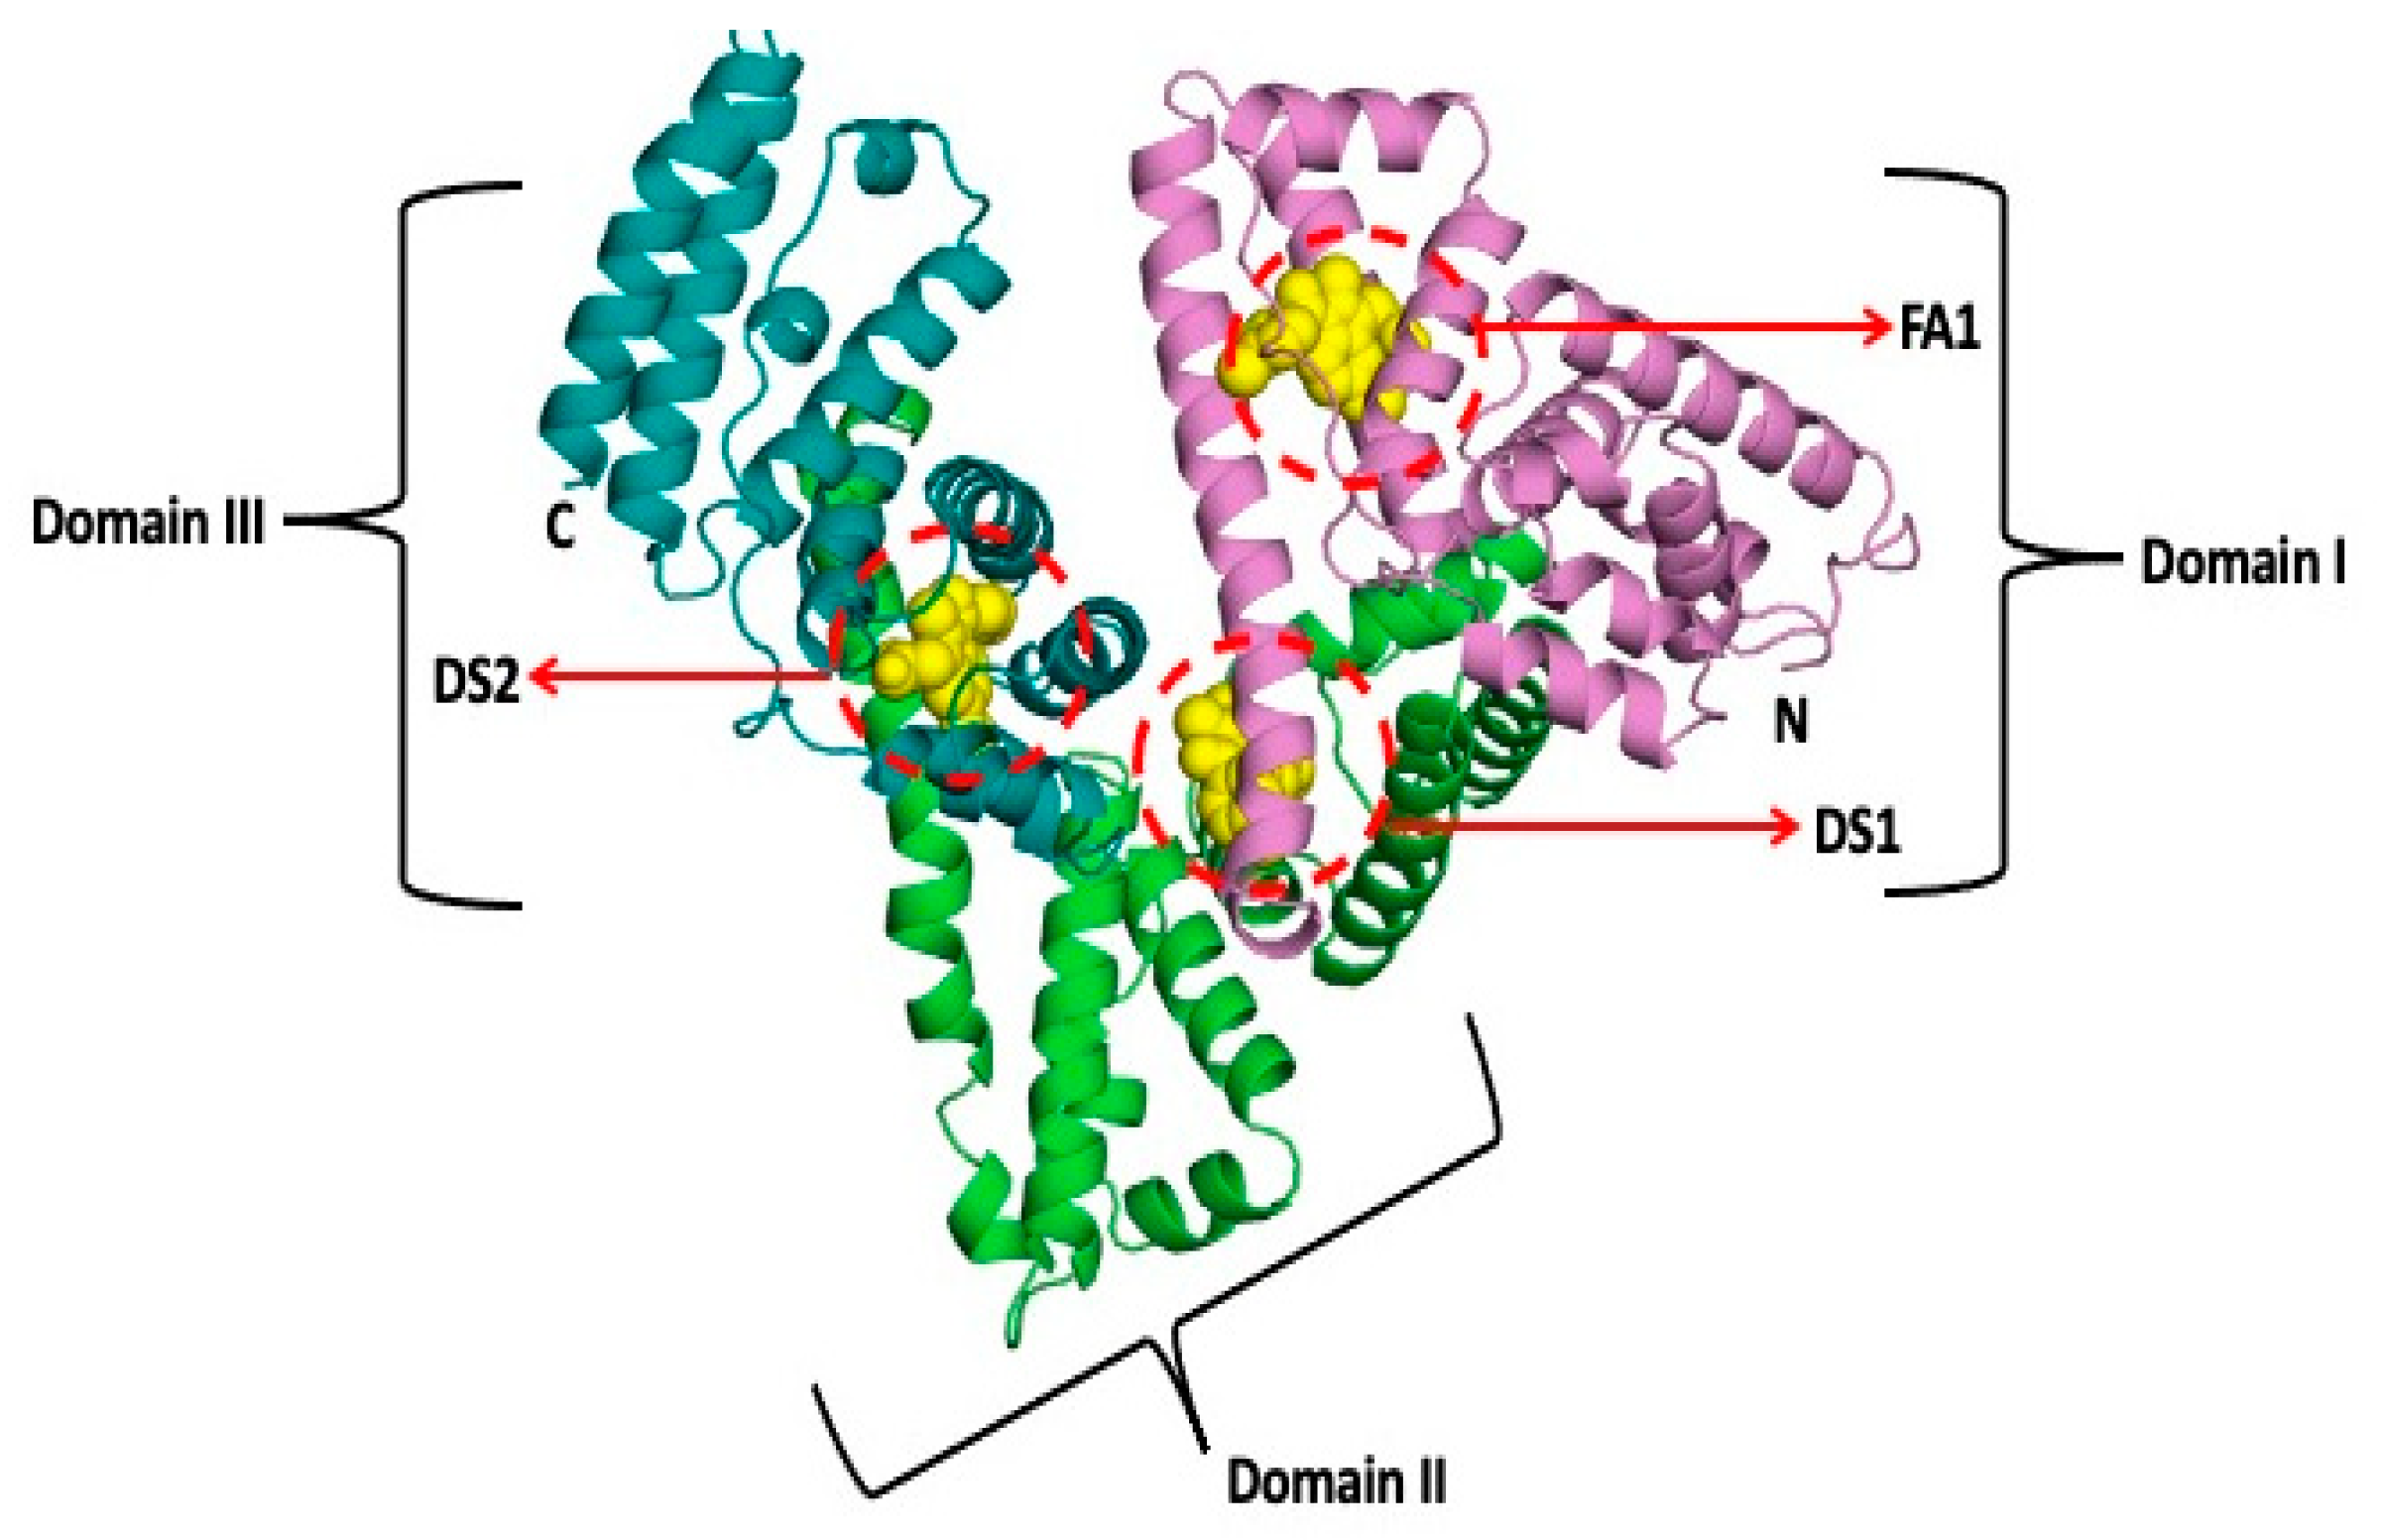 Molecular dynamics simulation of HSA-ligand complex for 50 ns time